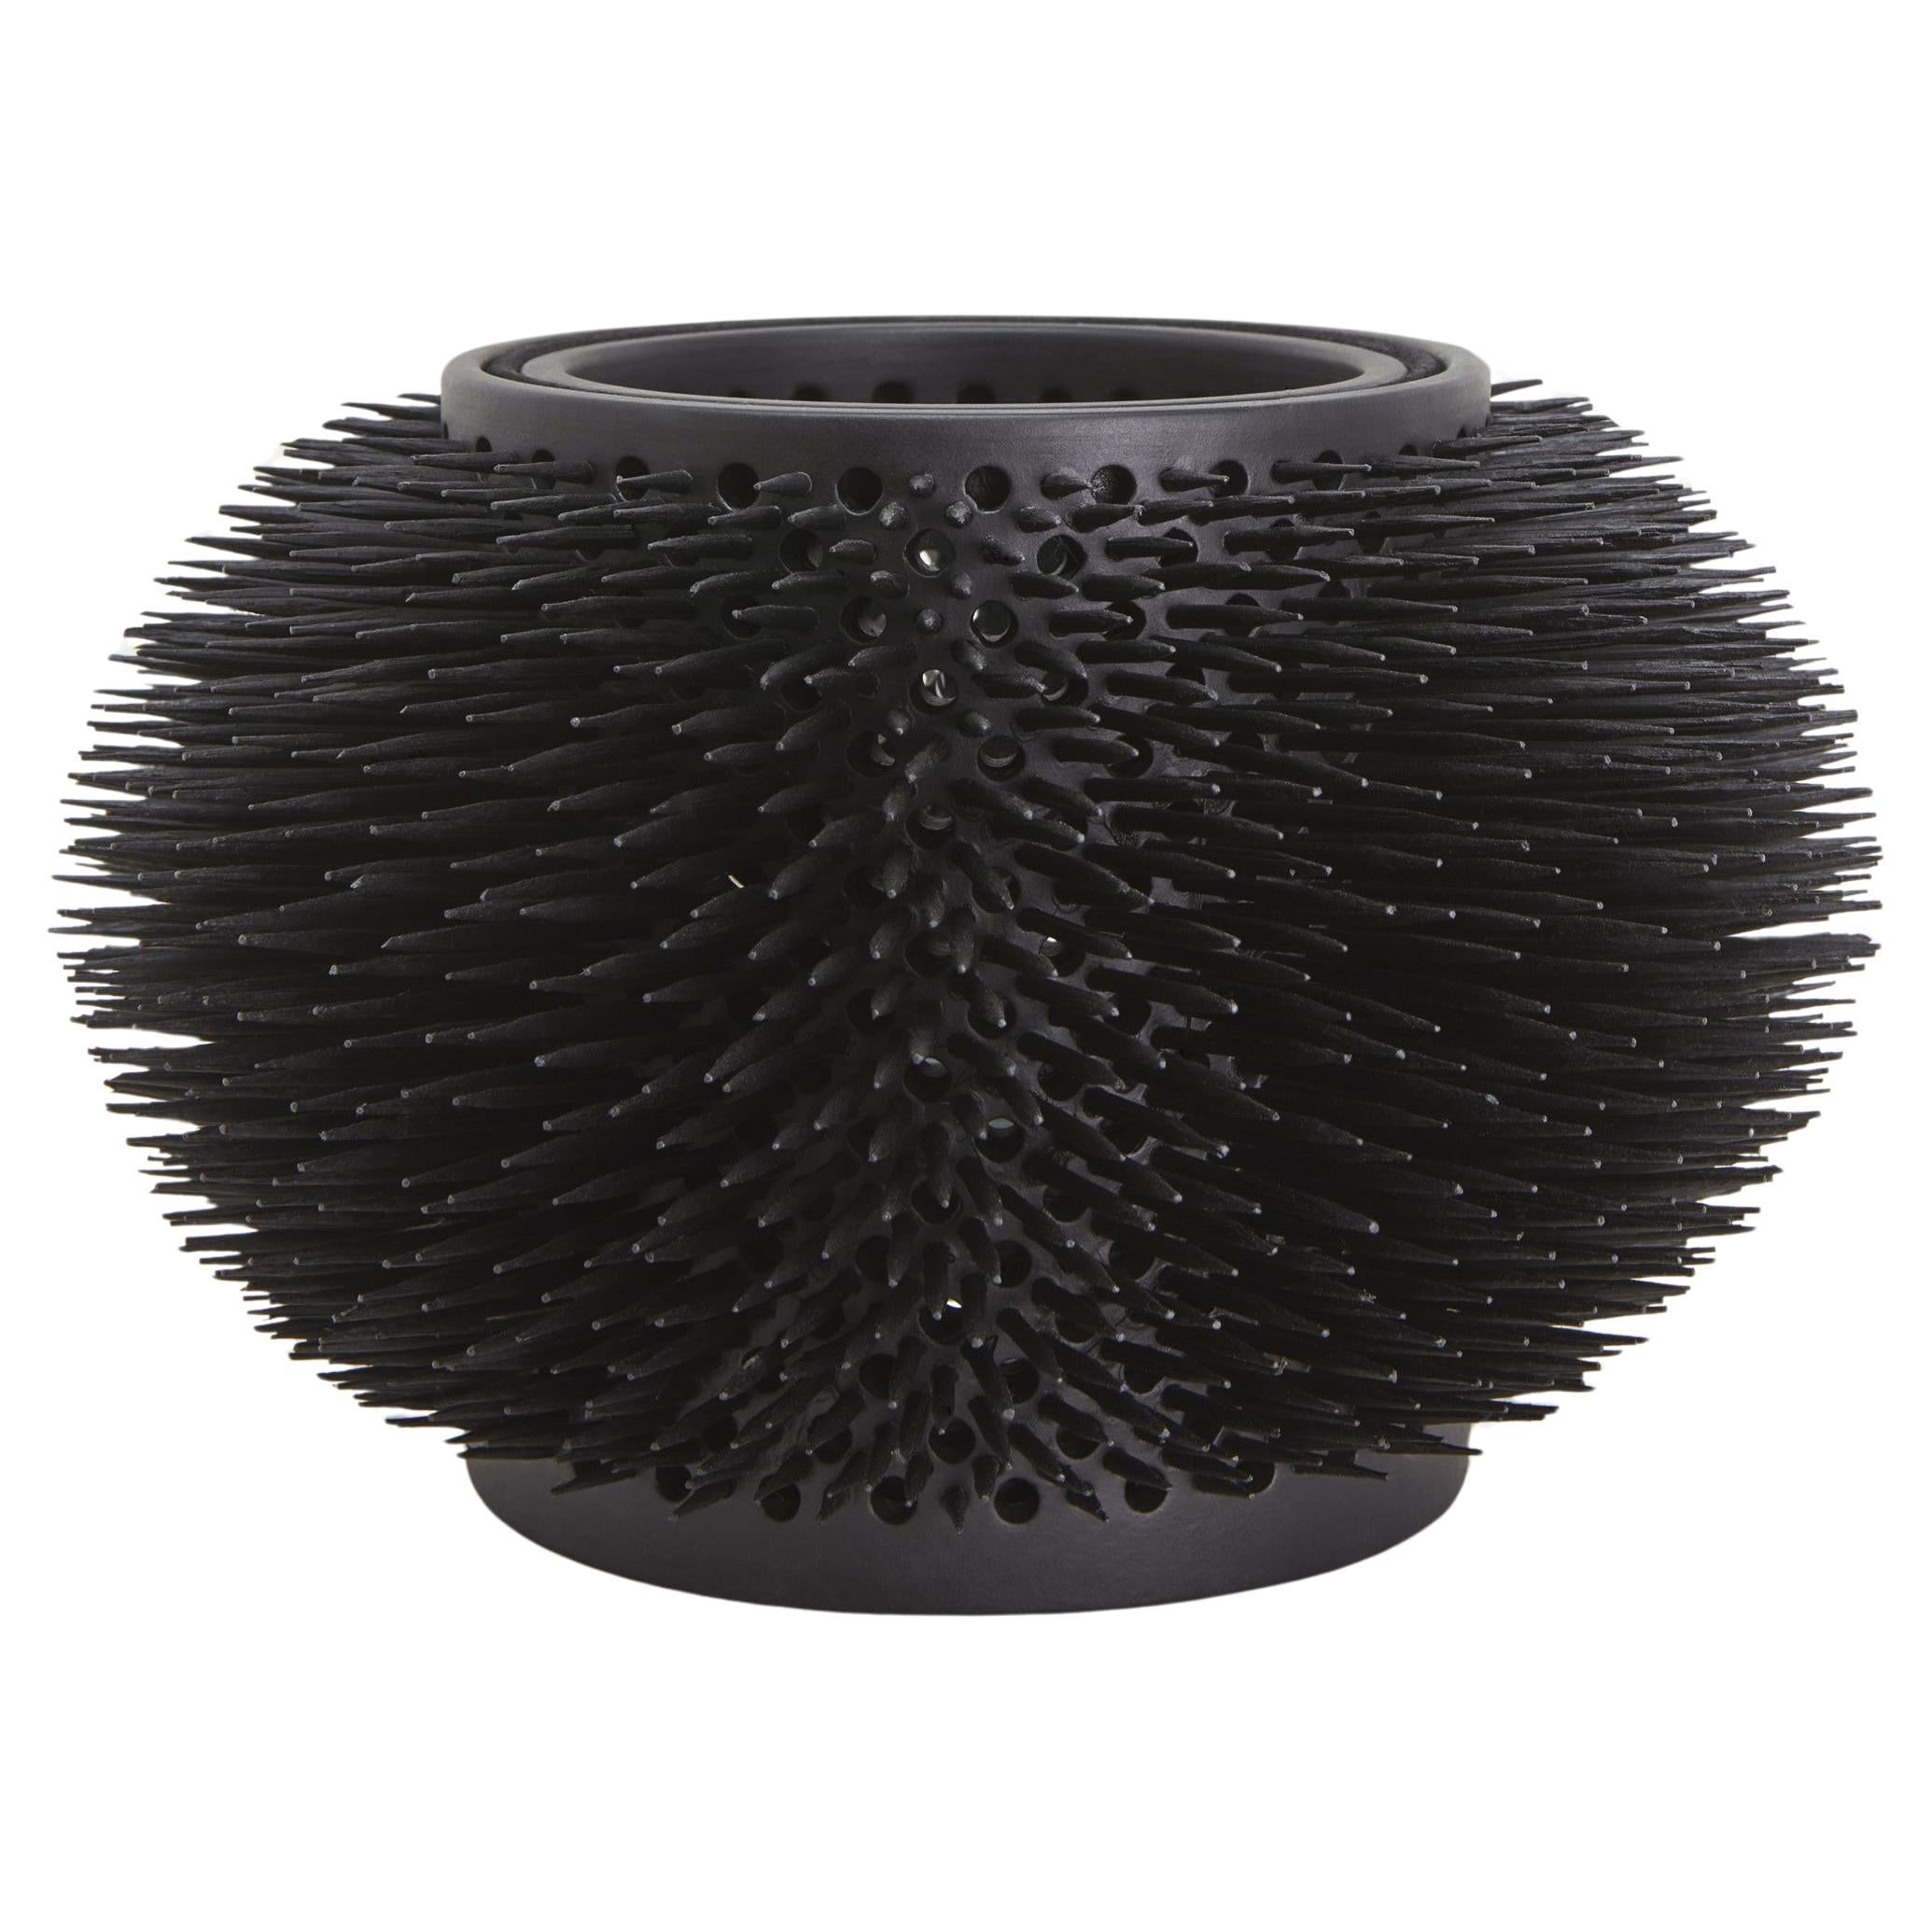 "Urchin" Earthenware and Wood Candle Votive by Gilles Caffier For Sale